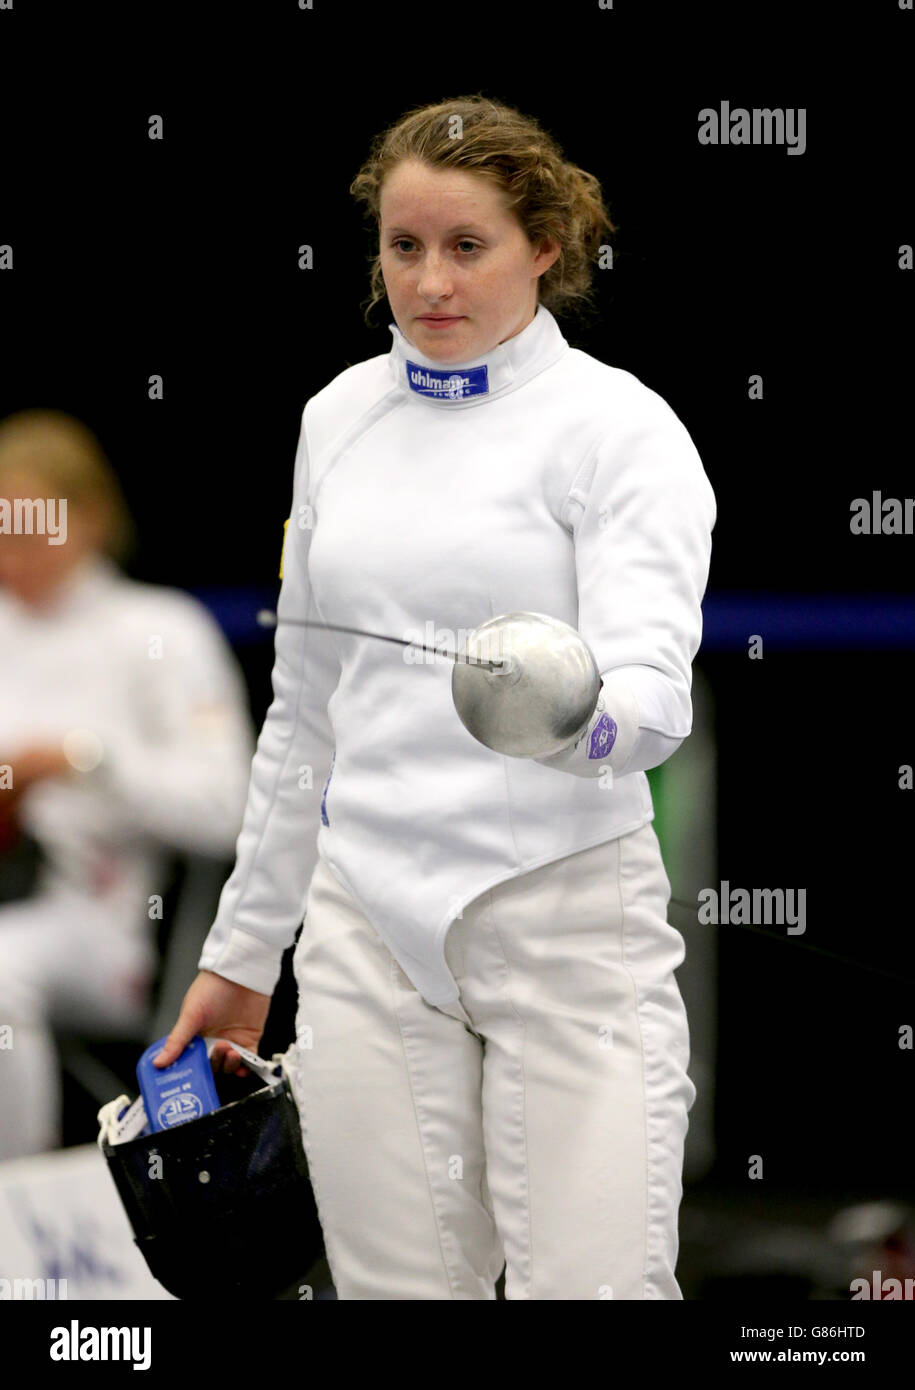 Ireland's Jennifer McGeever during day two of the European Modern Pentathlon Championships at the University of Bath. PRESS ASSOCIATION Photo. Picture date: Wednesday August 19, 2015. See PA story PENTATHLON European. Photo credit should read: Tim Goode/ PA Wire Stock Photo